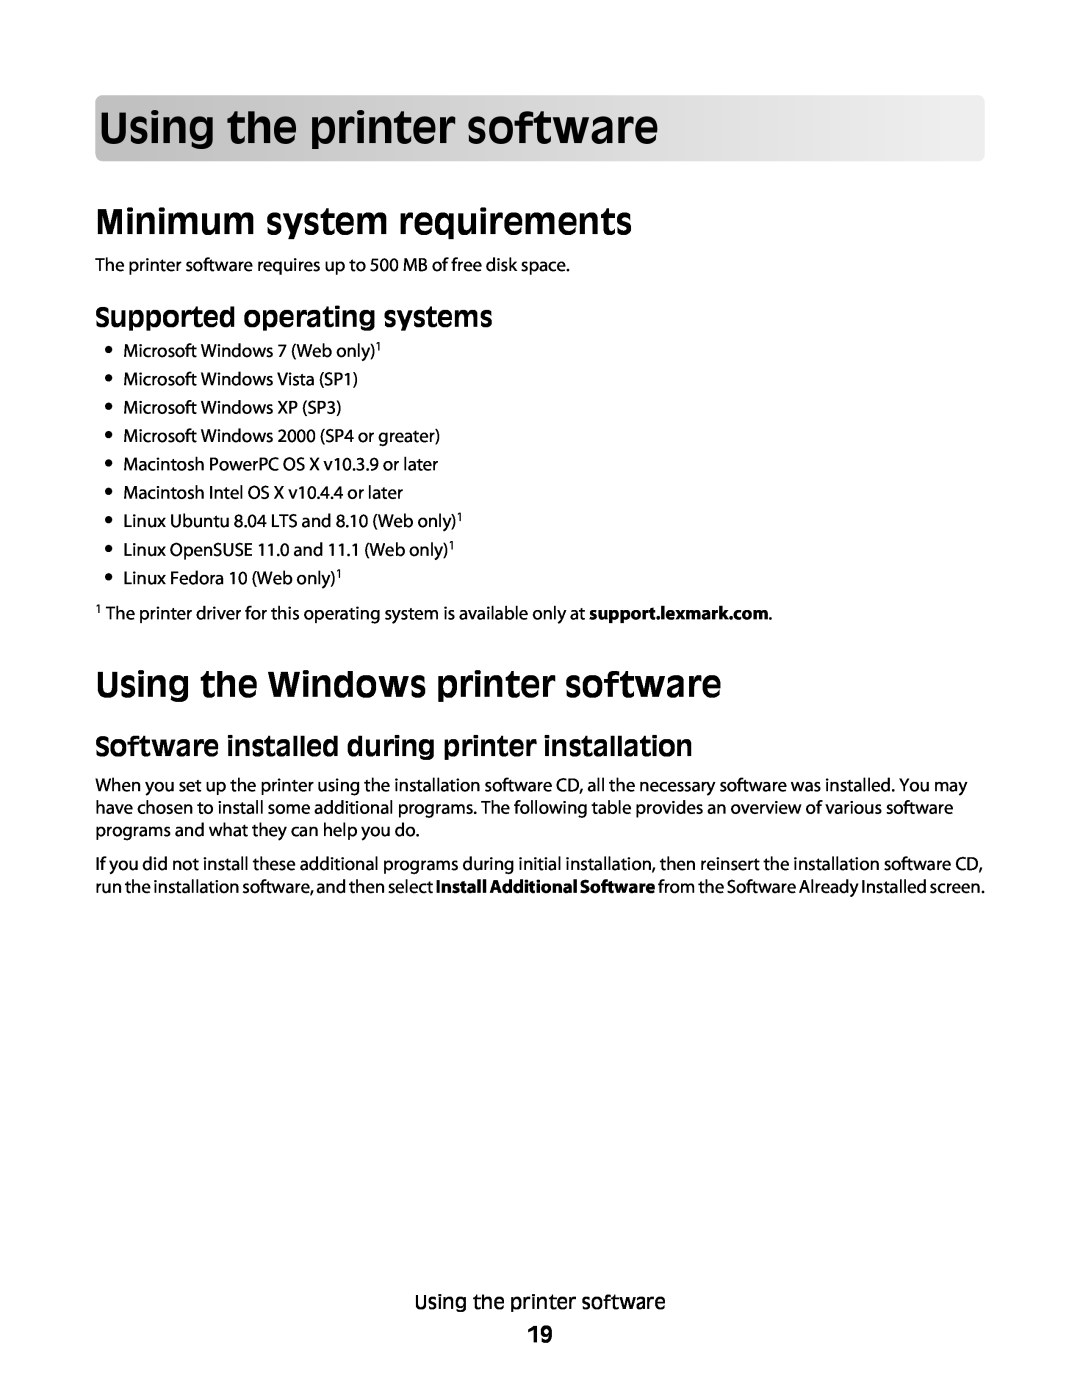 Lexmark 30E, S500, 301 manual Usingthe printersoftware, Minimum system requirements, Using the Windows printer software 